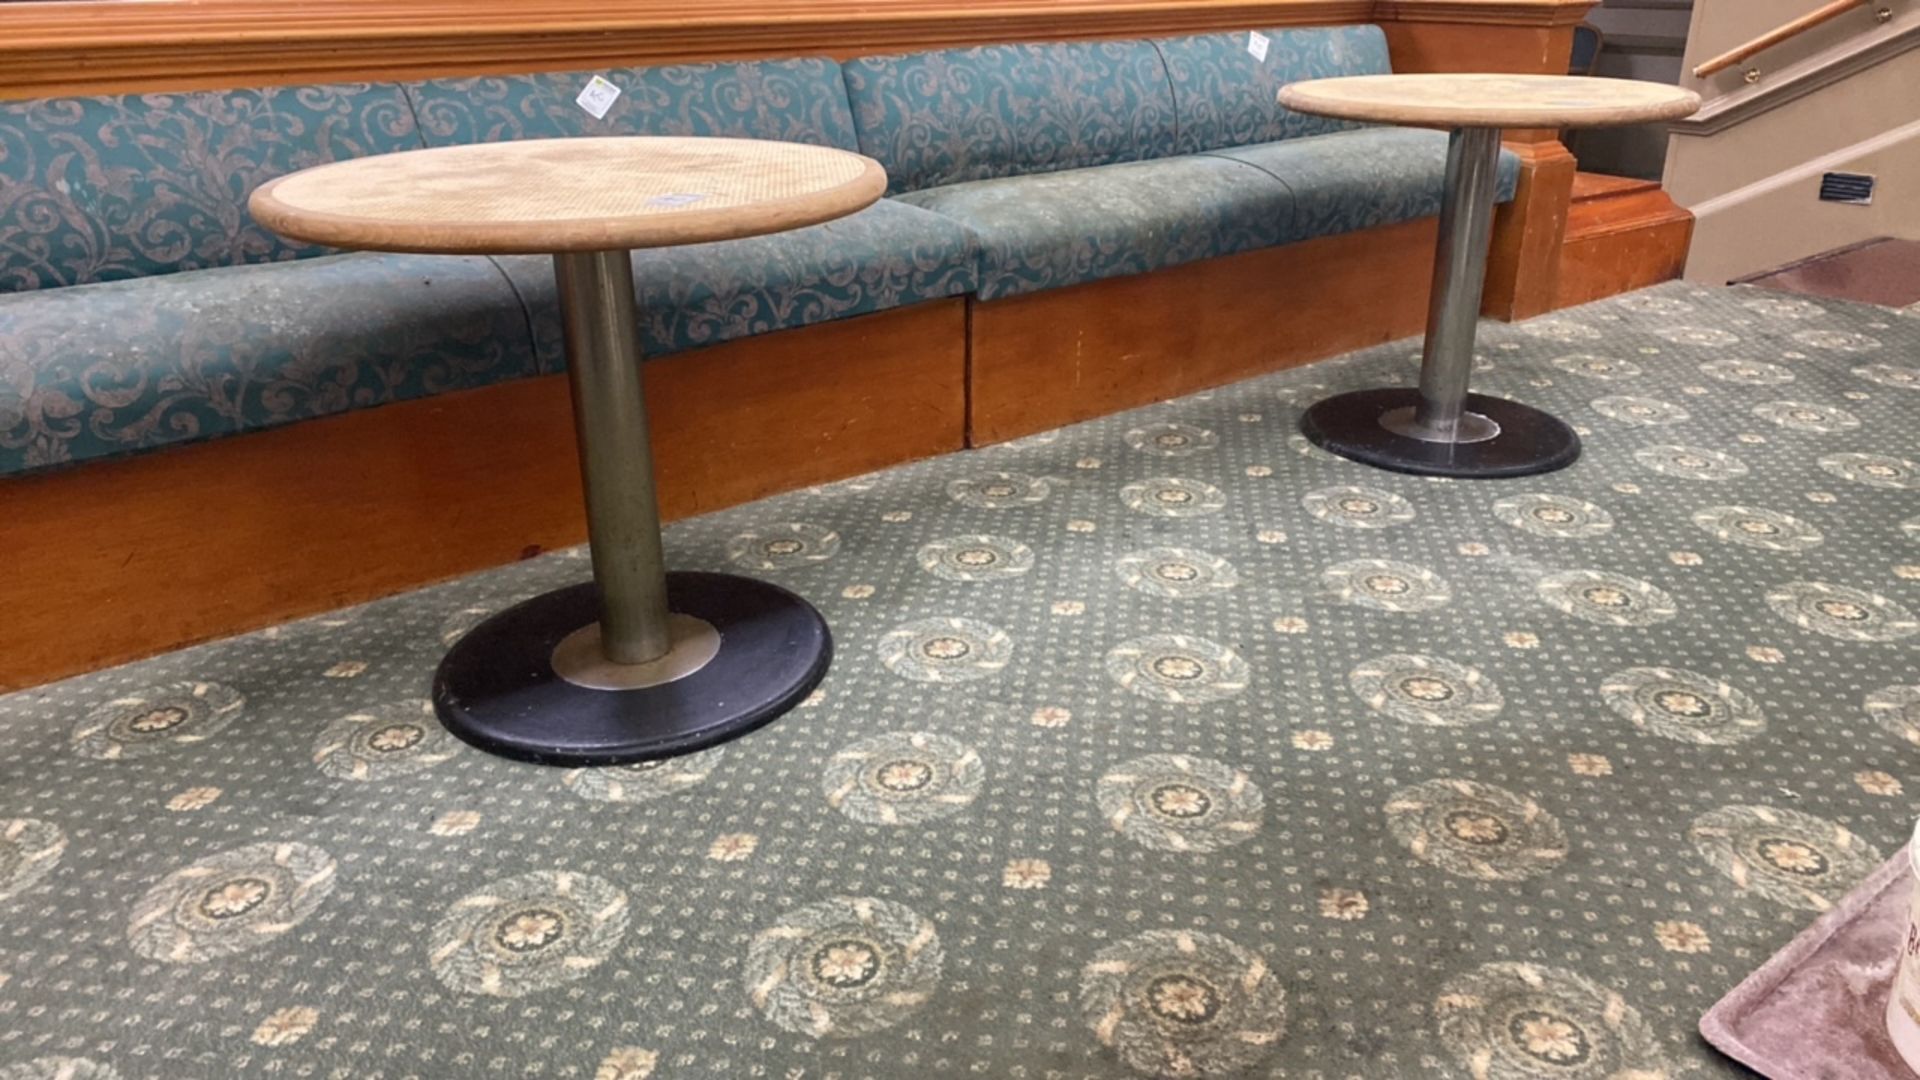 Banquette Seat & Tables - Image 2 of 2